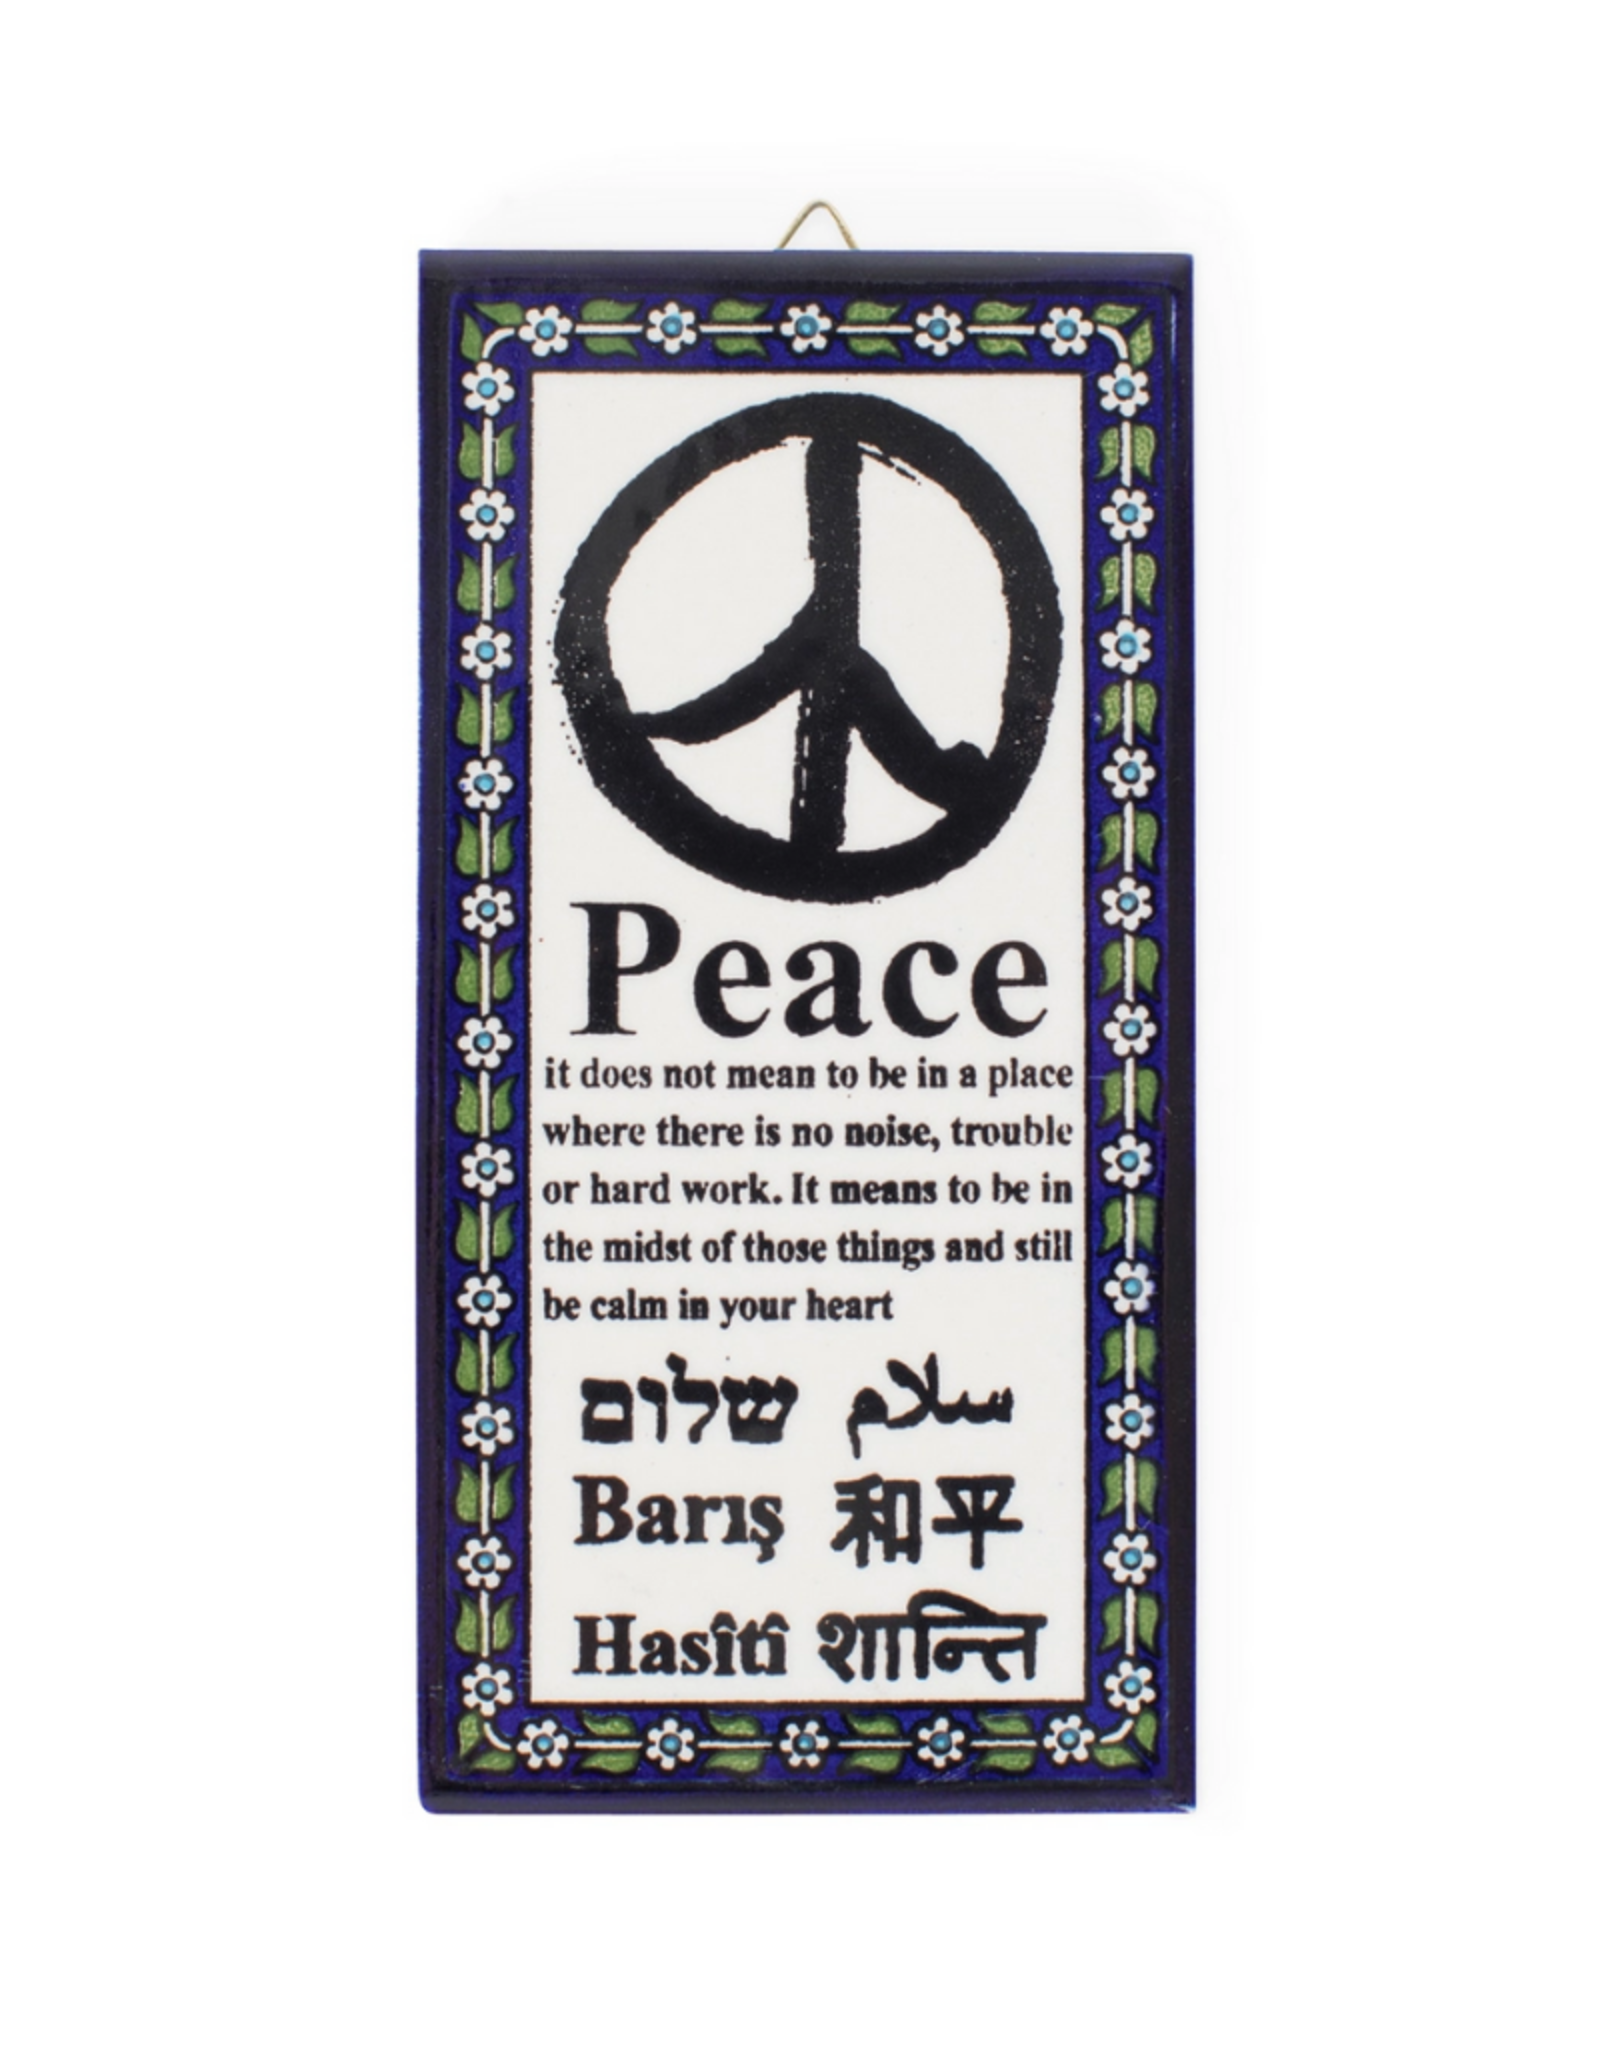 West Bank Wall Art Meaning of Peace - West Bank